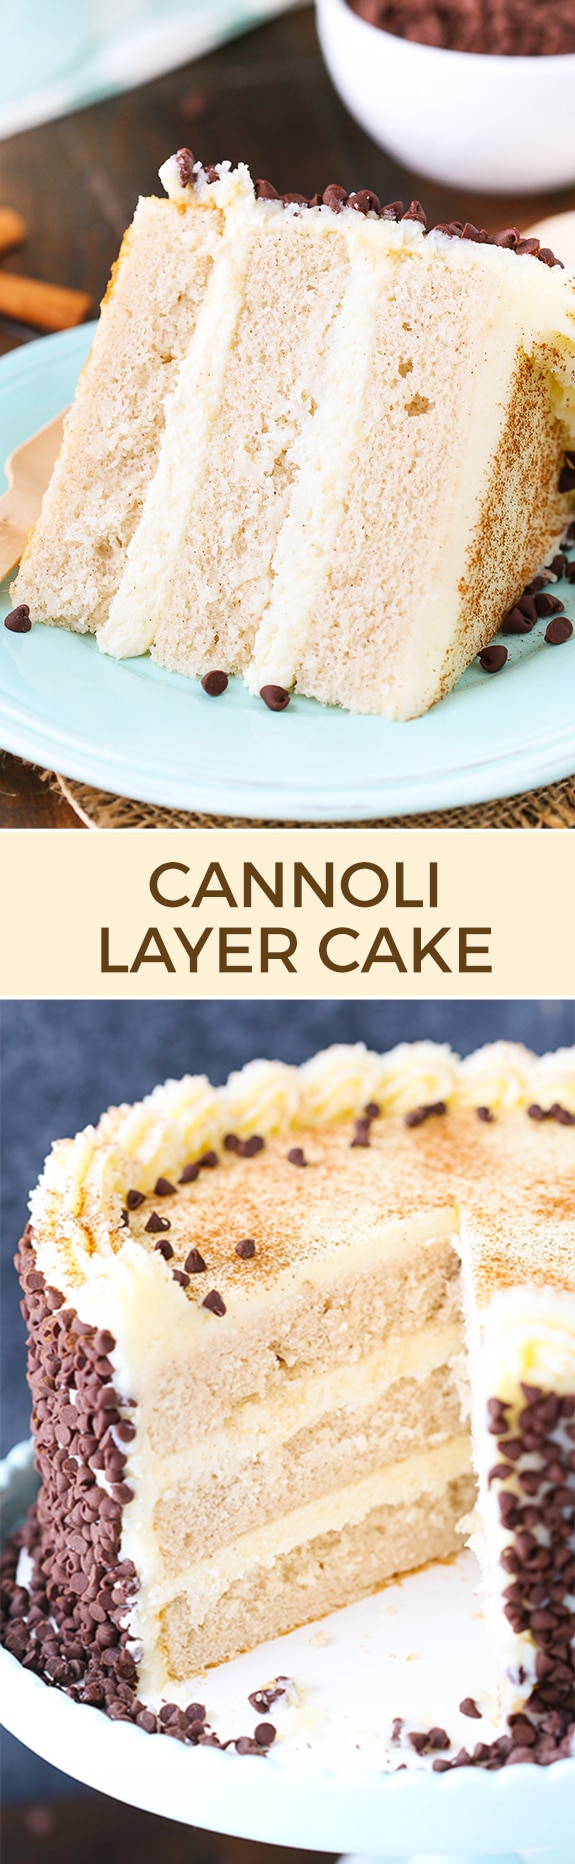 Cannoli Layer Cake - moist and fluffy layers of cinnamon cake with mascarpone and ricotta filling and a mascarpone frosting! To die for!